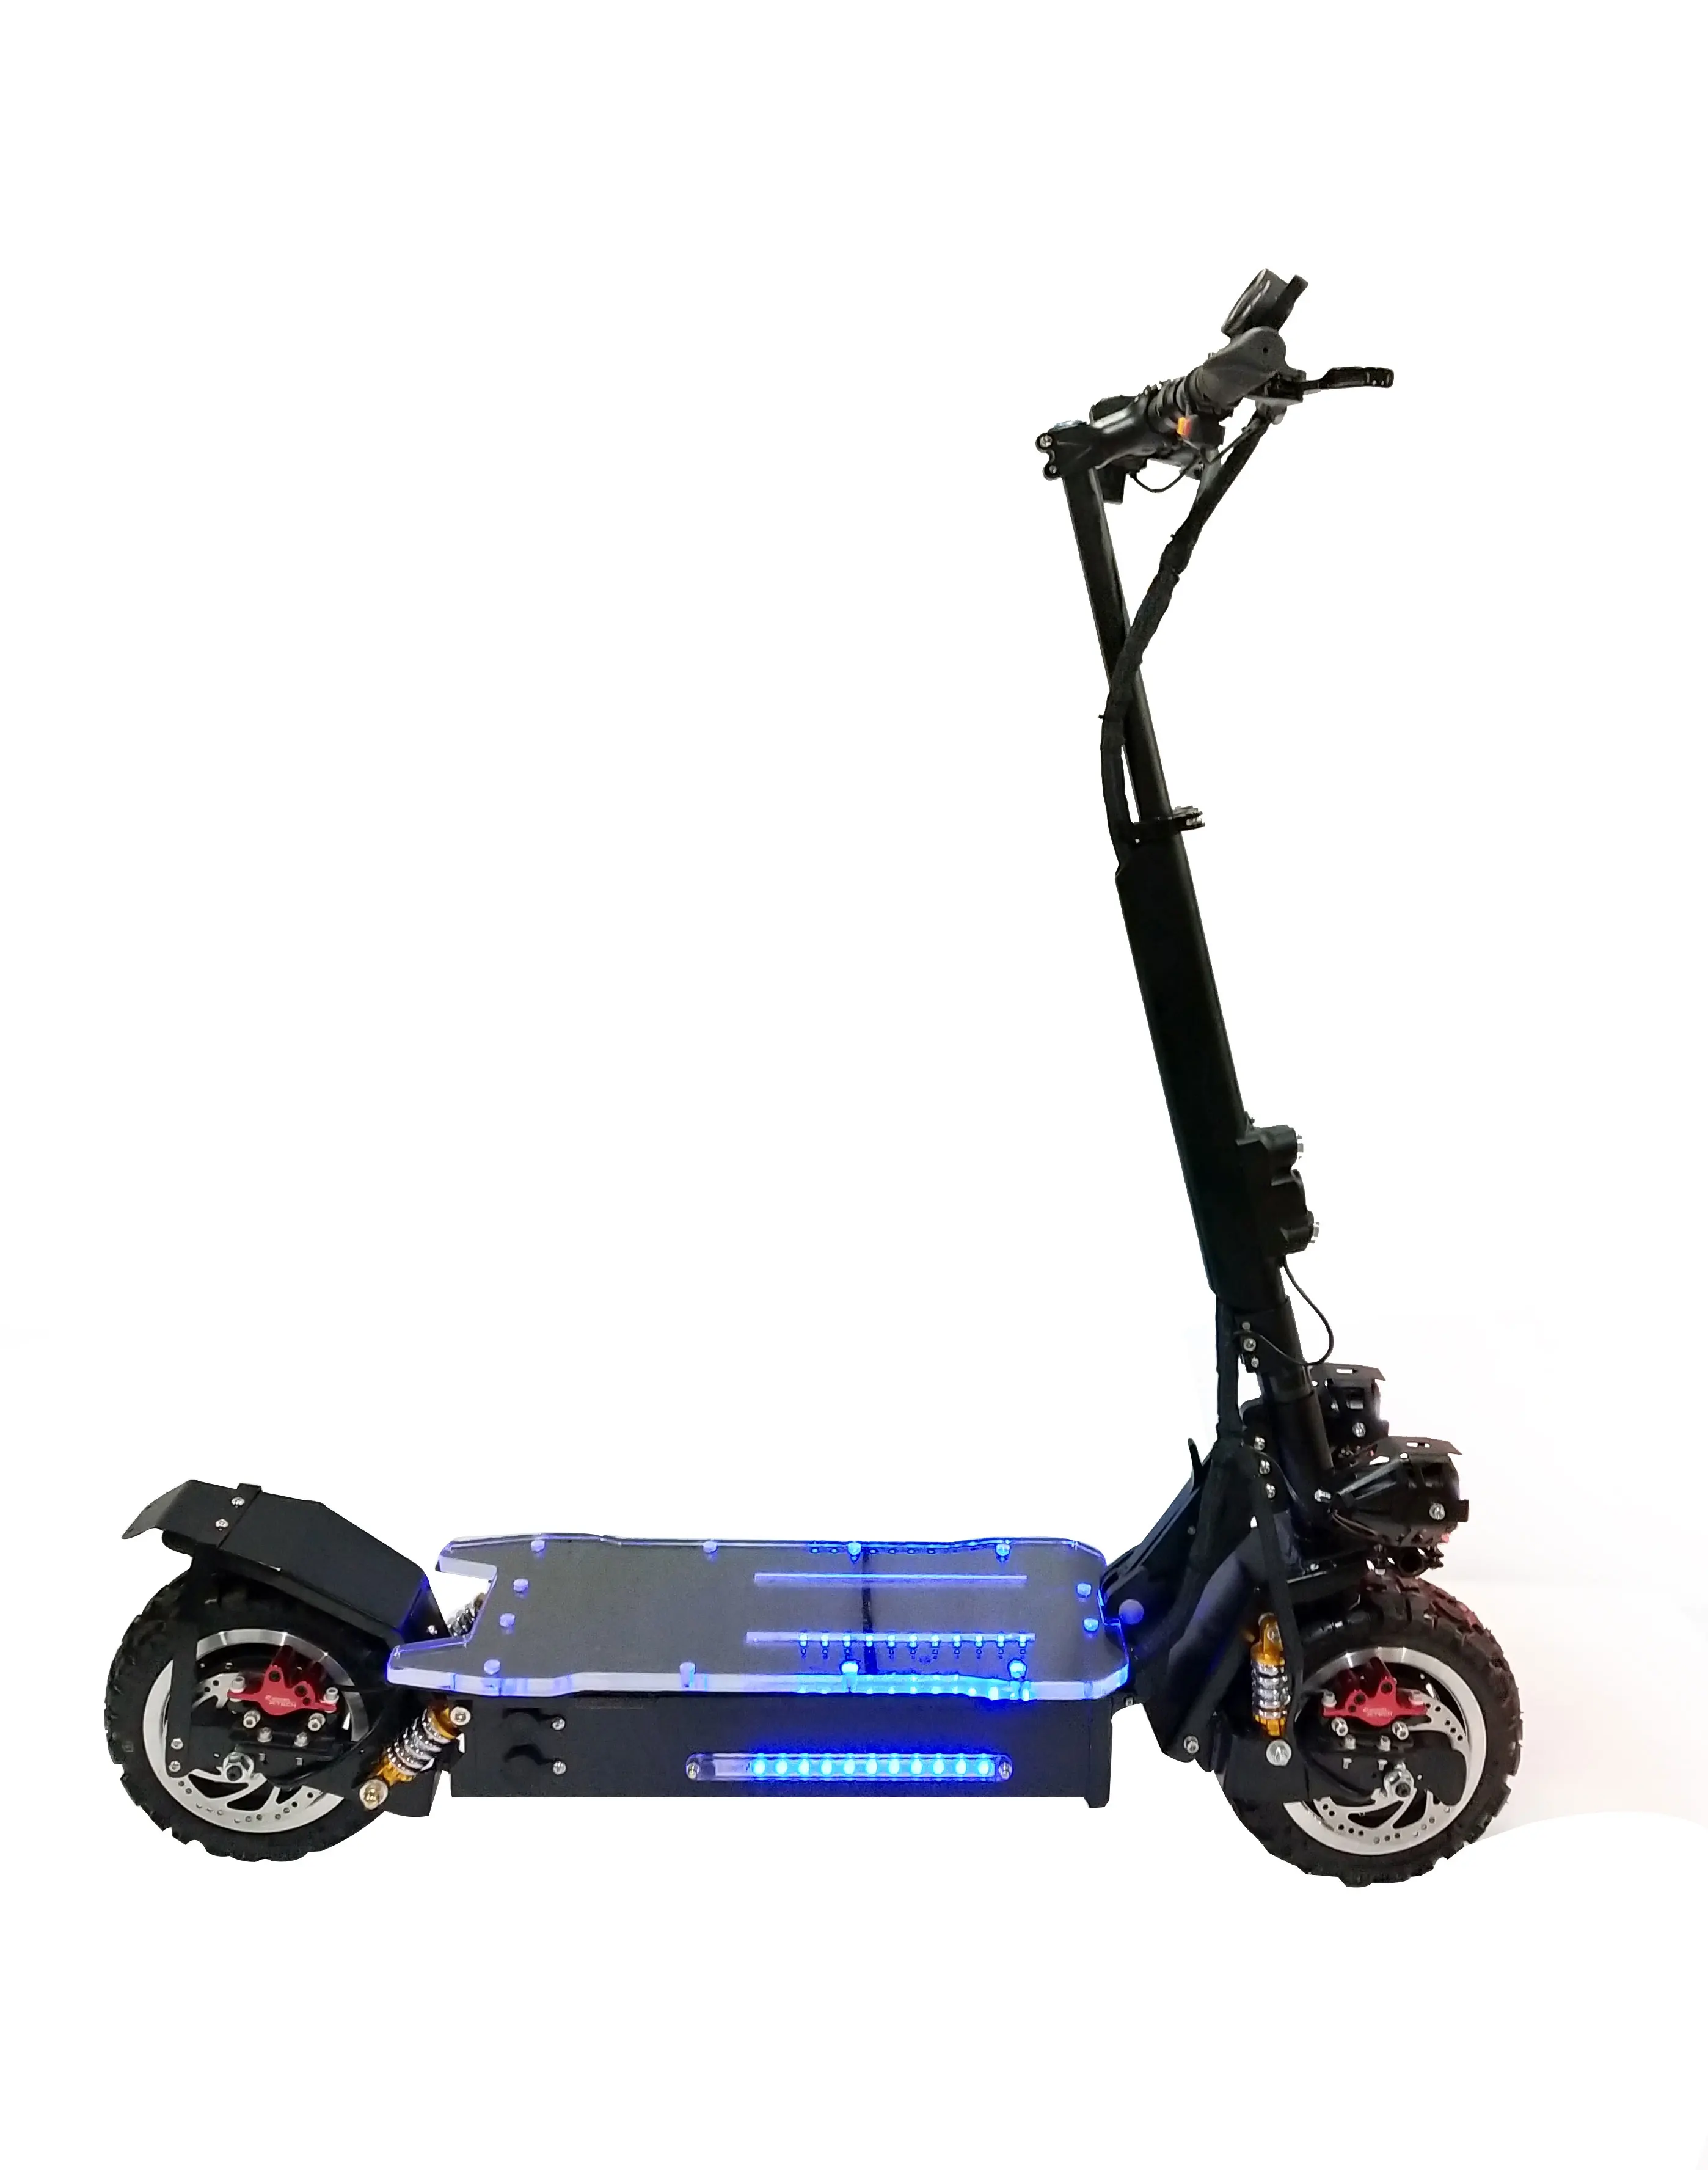 1000w to 2000w Big power Double motors electric scooter